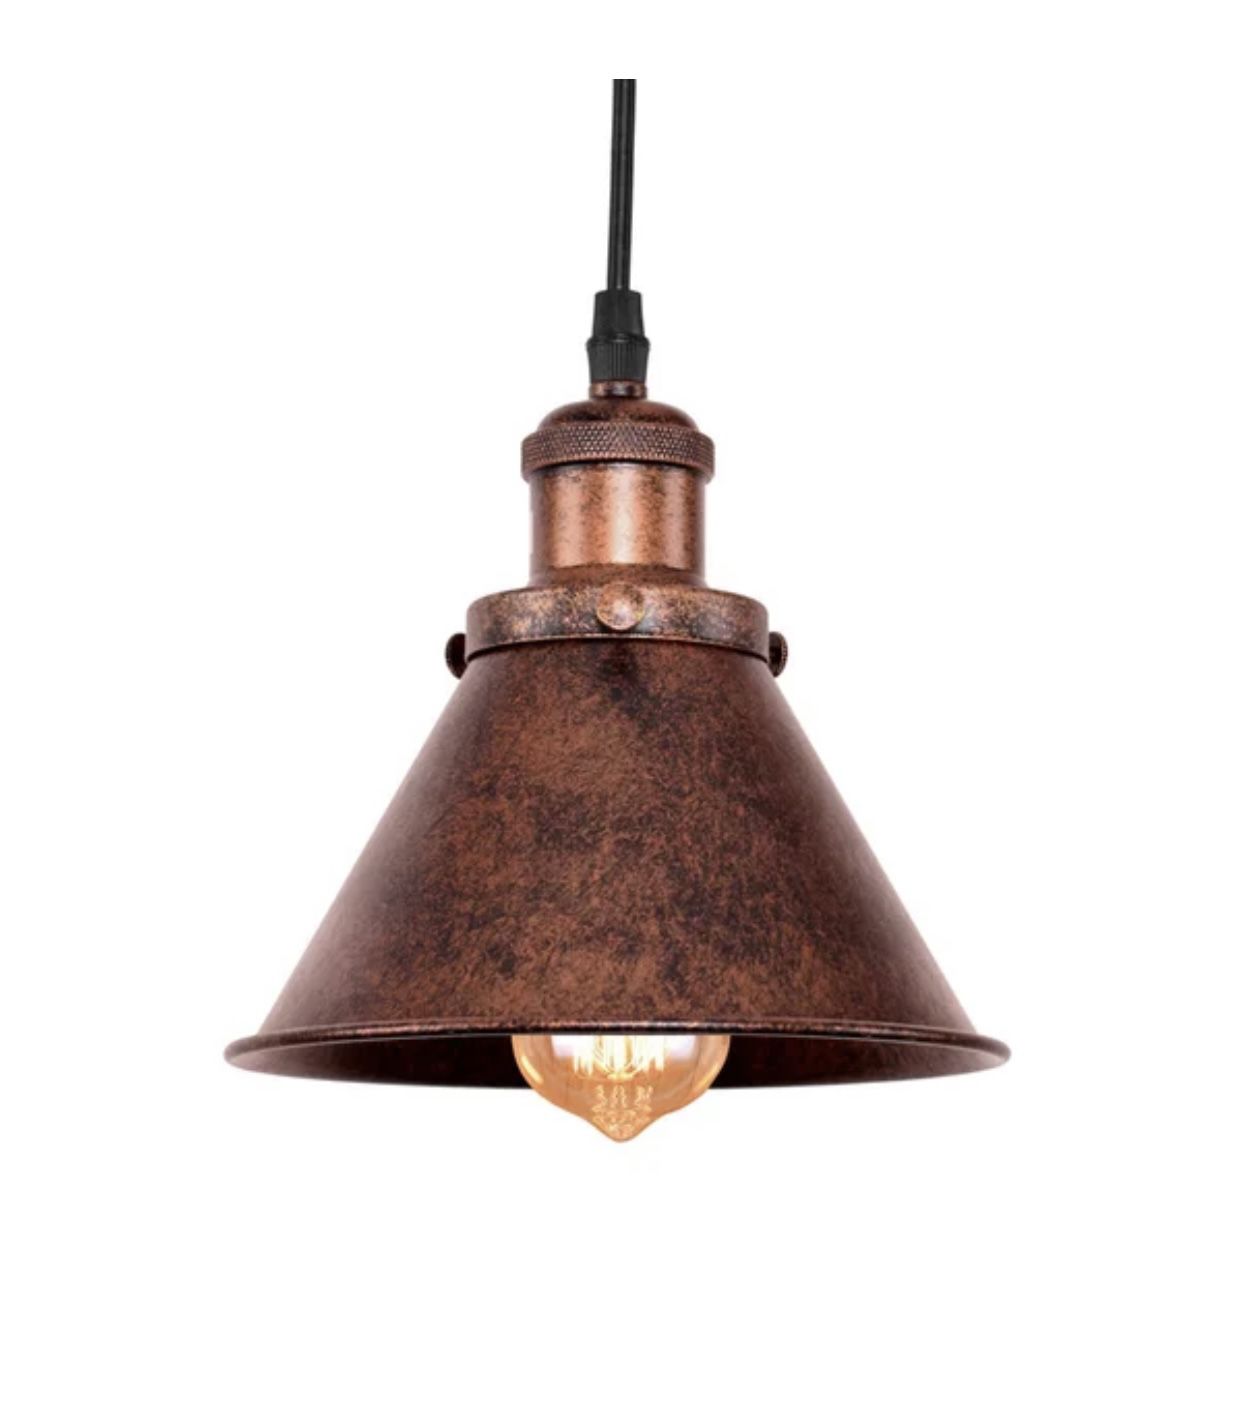 Hjsdi Industrial Pendant Light Rustic Cone Shade Mounted Fixture Hanging Ceiling Lamp Antique Copper Finish. SMALL! 7.09” x 7.09”. MSRP $112. Our pric